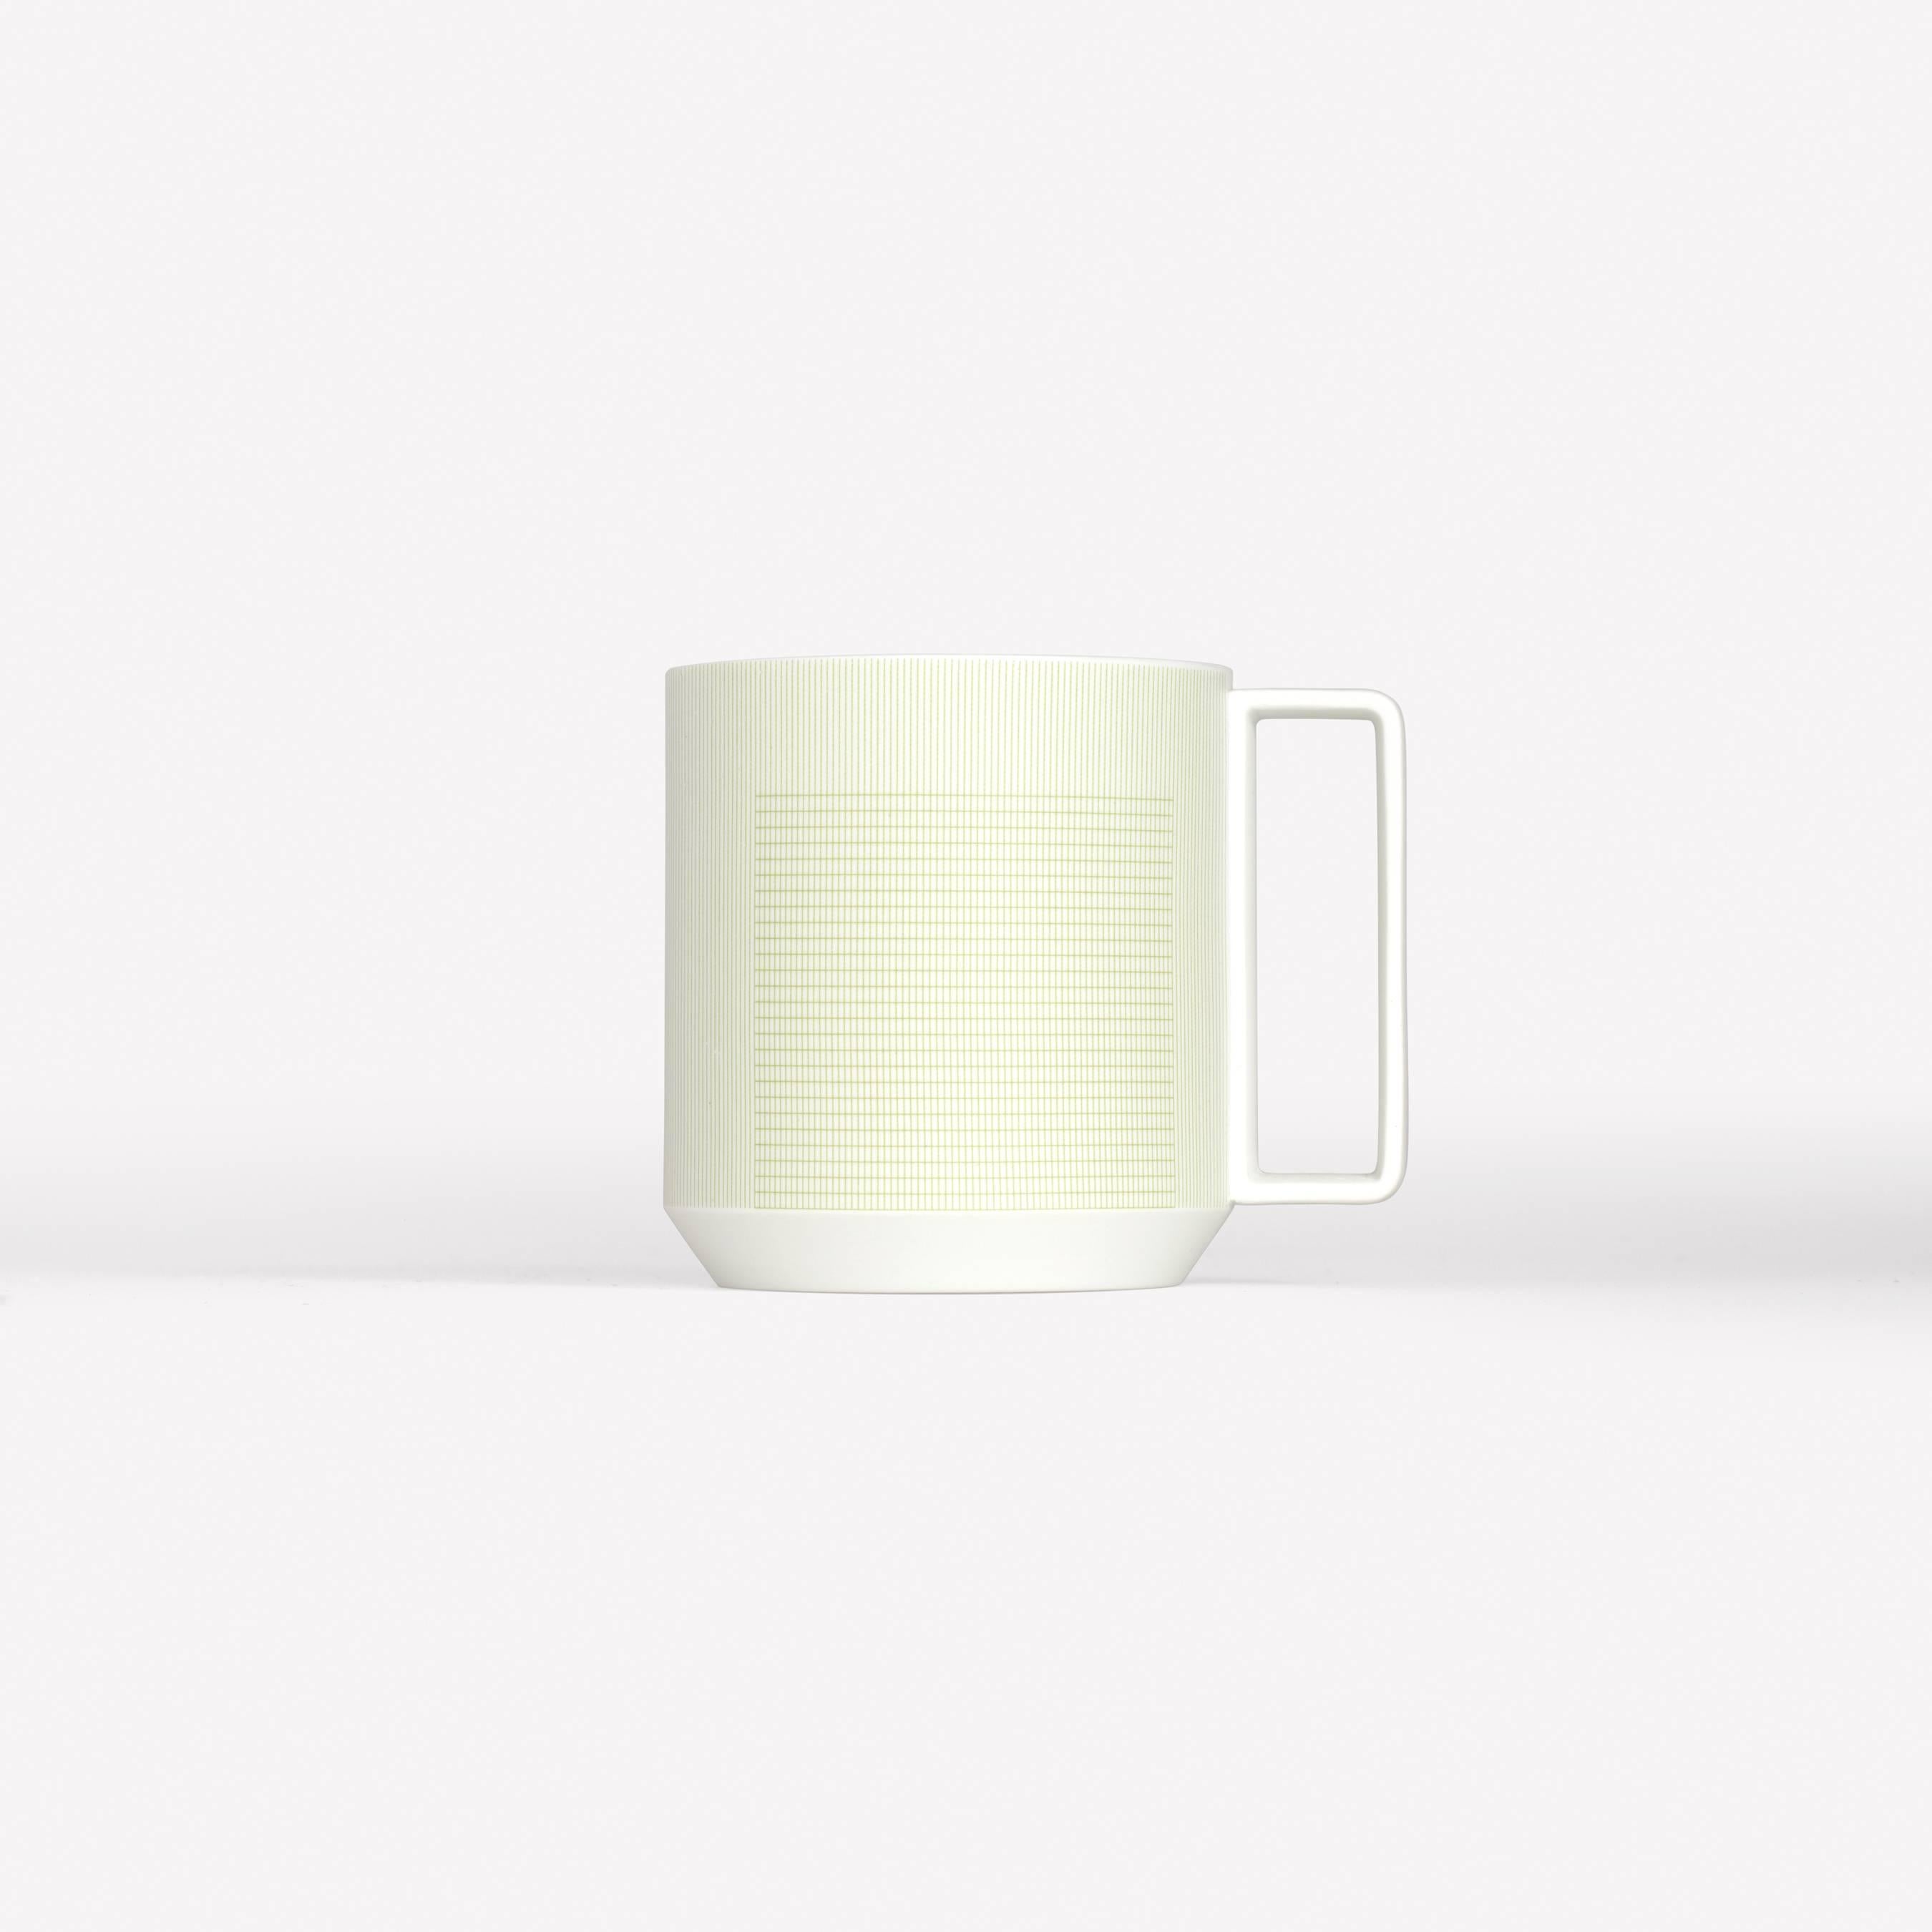 Pattern Porcelain Mug by Scholten & Baijings
001 Matcha

Porcelain with Grid textile graphic. Matte exterior with gloss interior. Made in Japan by 1616 / arita Japan. Dishwasher safe.

Scholten & Baijings for Maharam is a collection of home goods